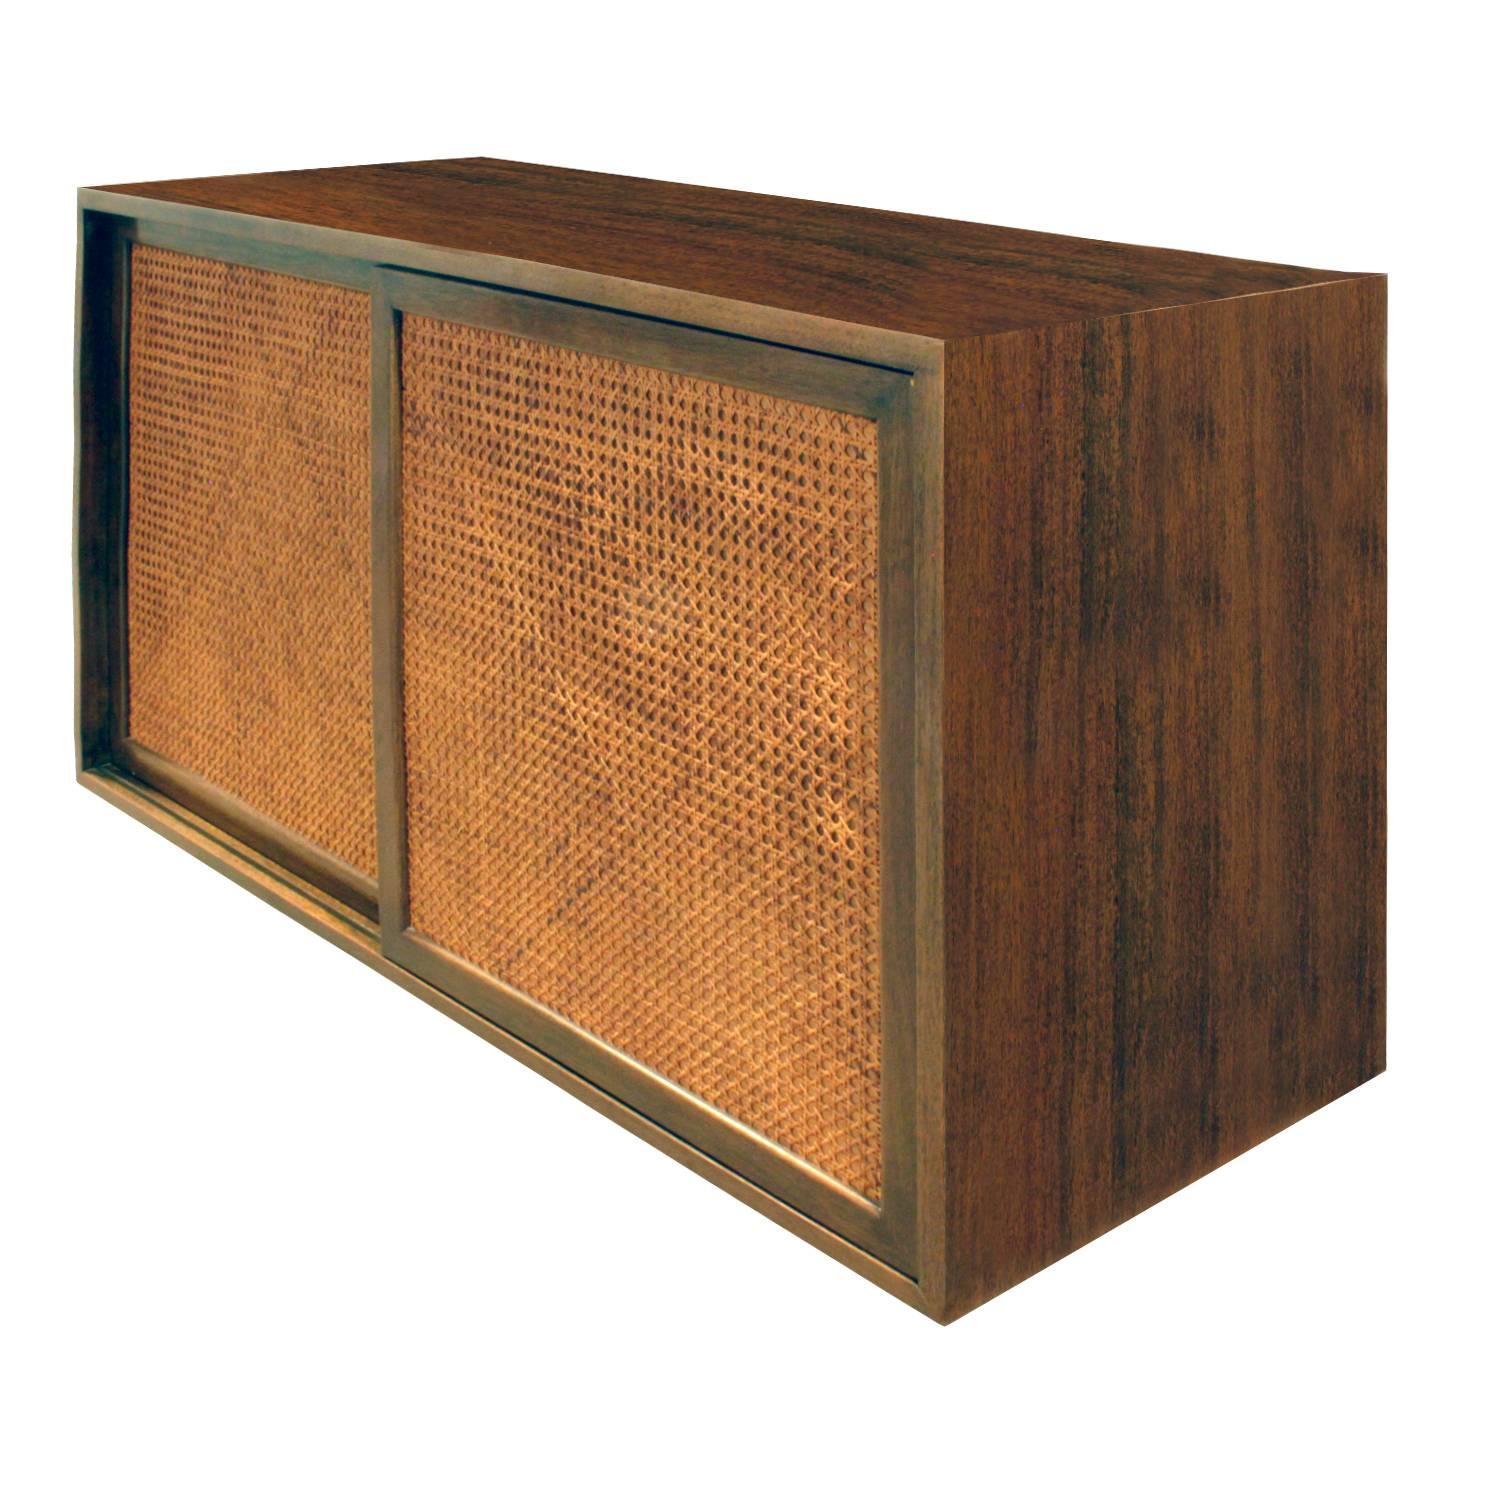 Mid-Century Modern Harvey Probber Wall Mounted Cabinet with Inset Caned Doors, 1950s